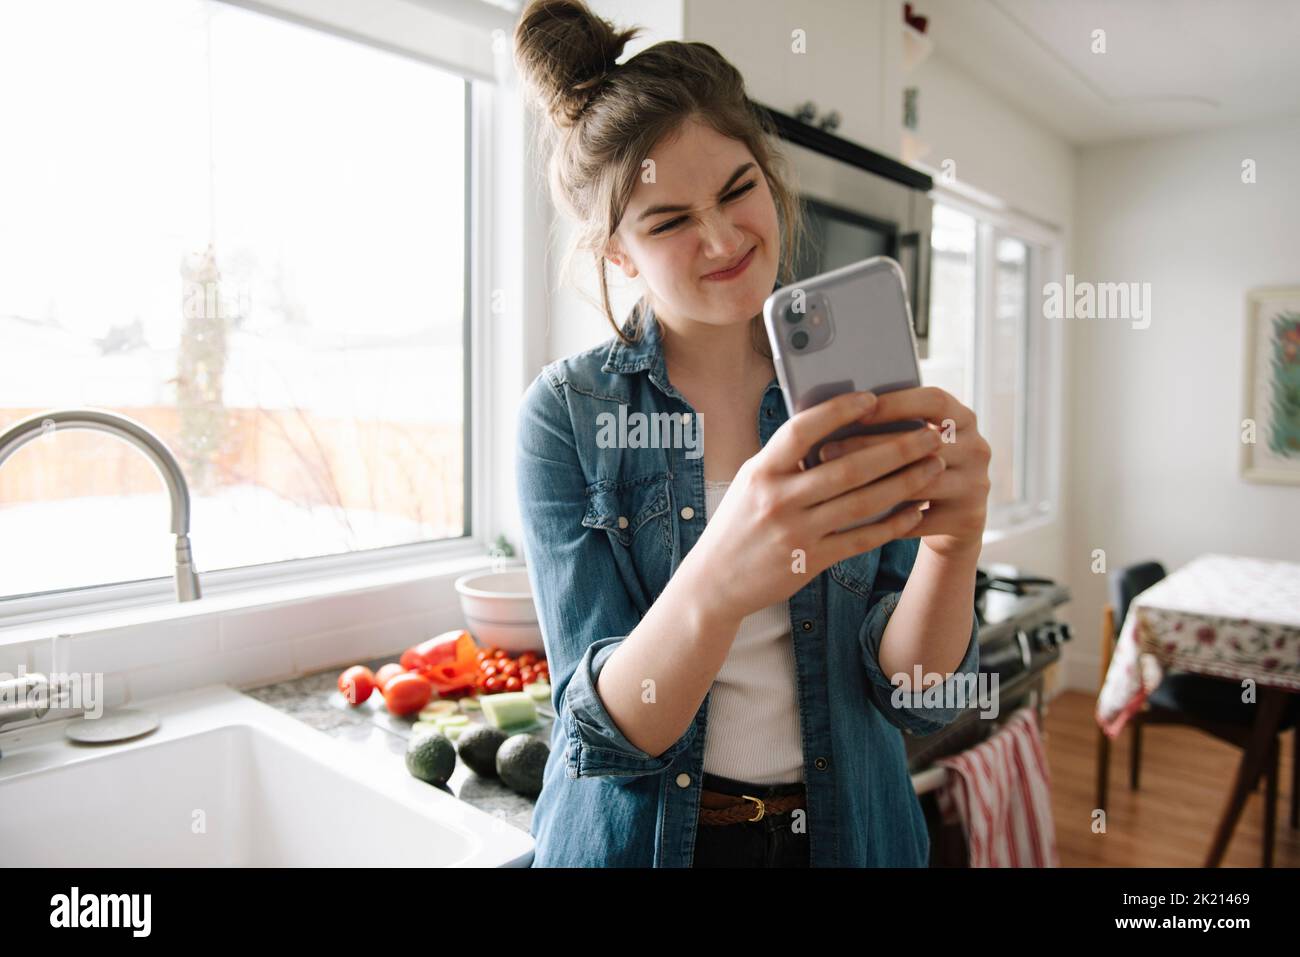 Playful teenage girl making a face and taking selfie in kitchen Stock Photo